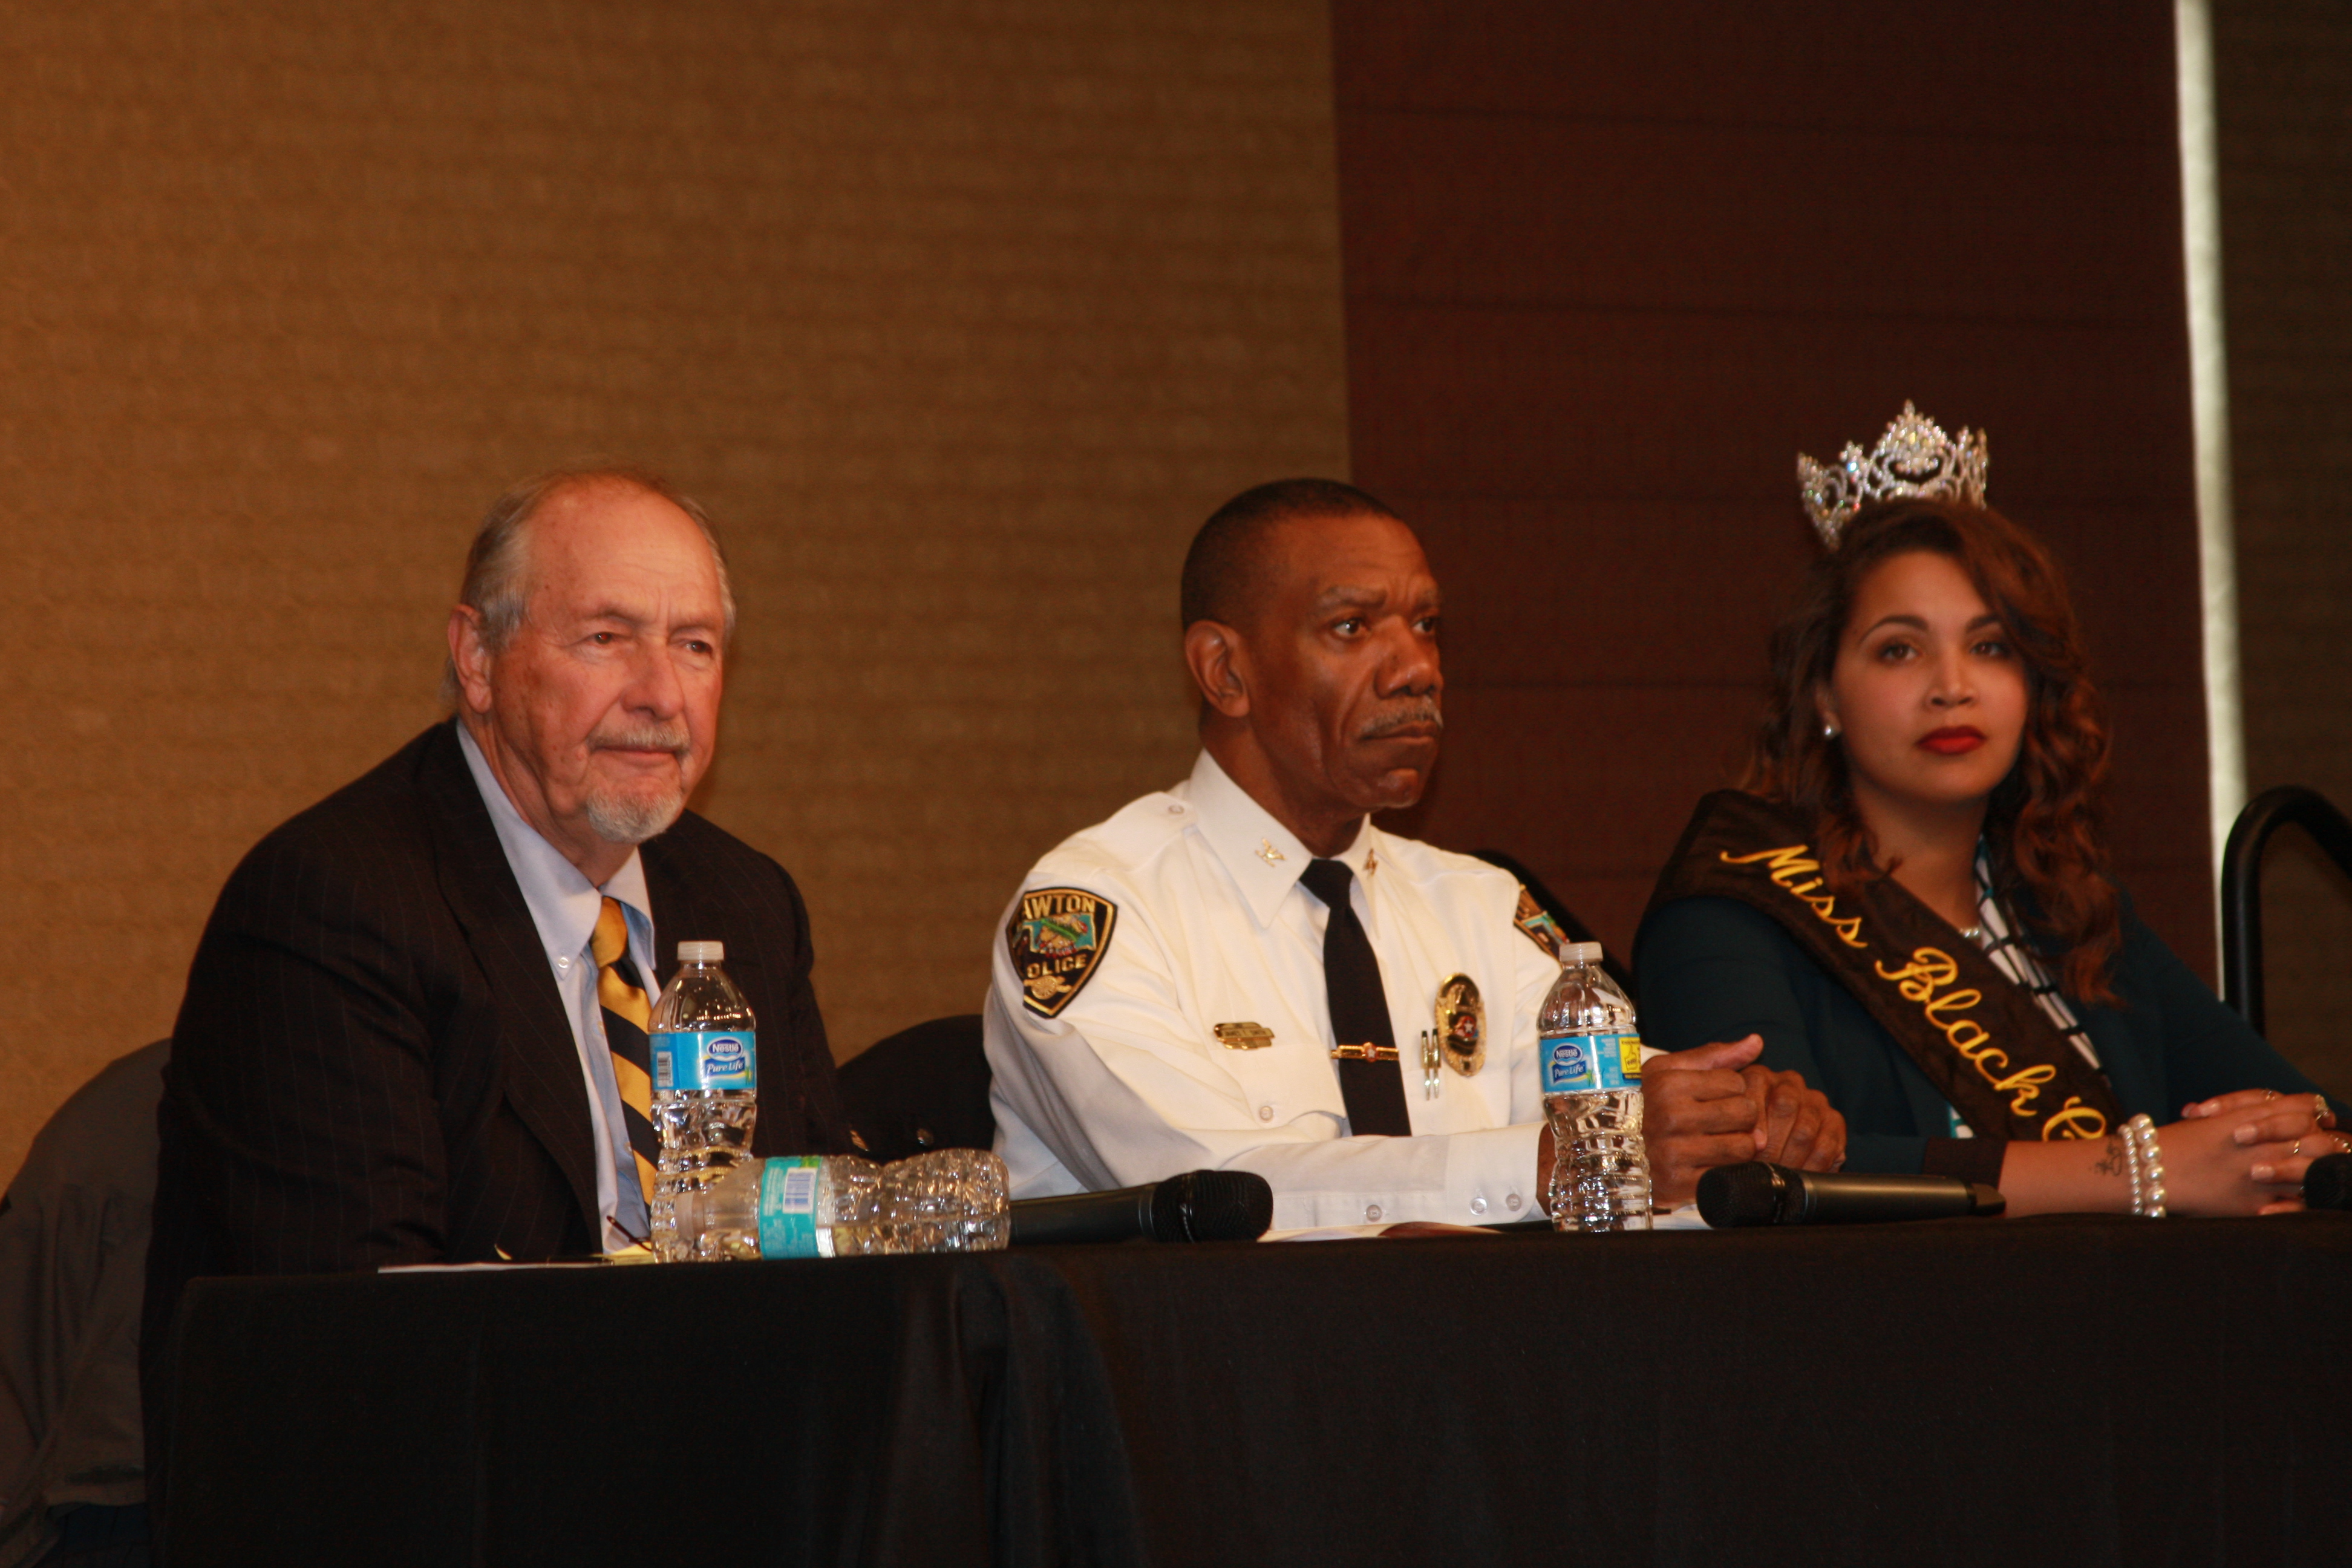 Honoring MLK: Panel discusses Civil Rights